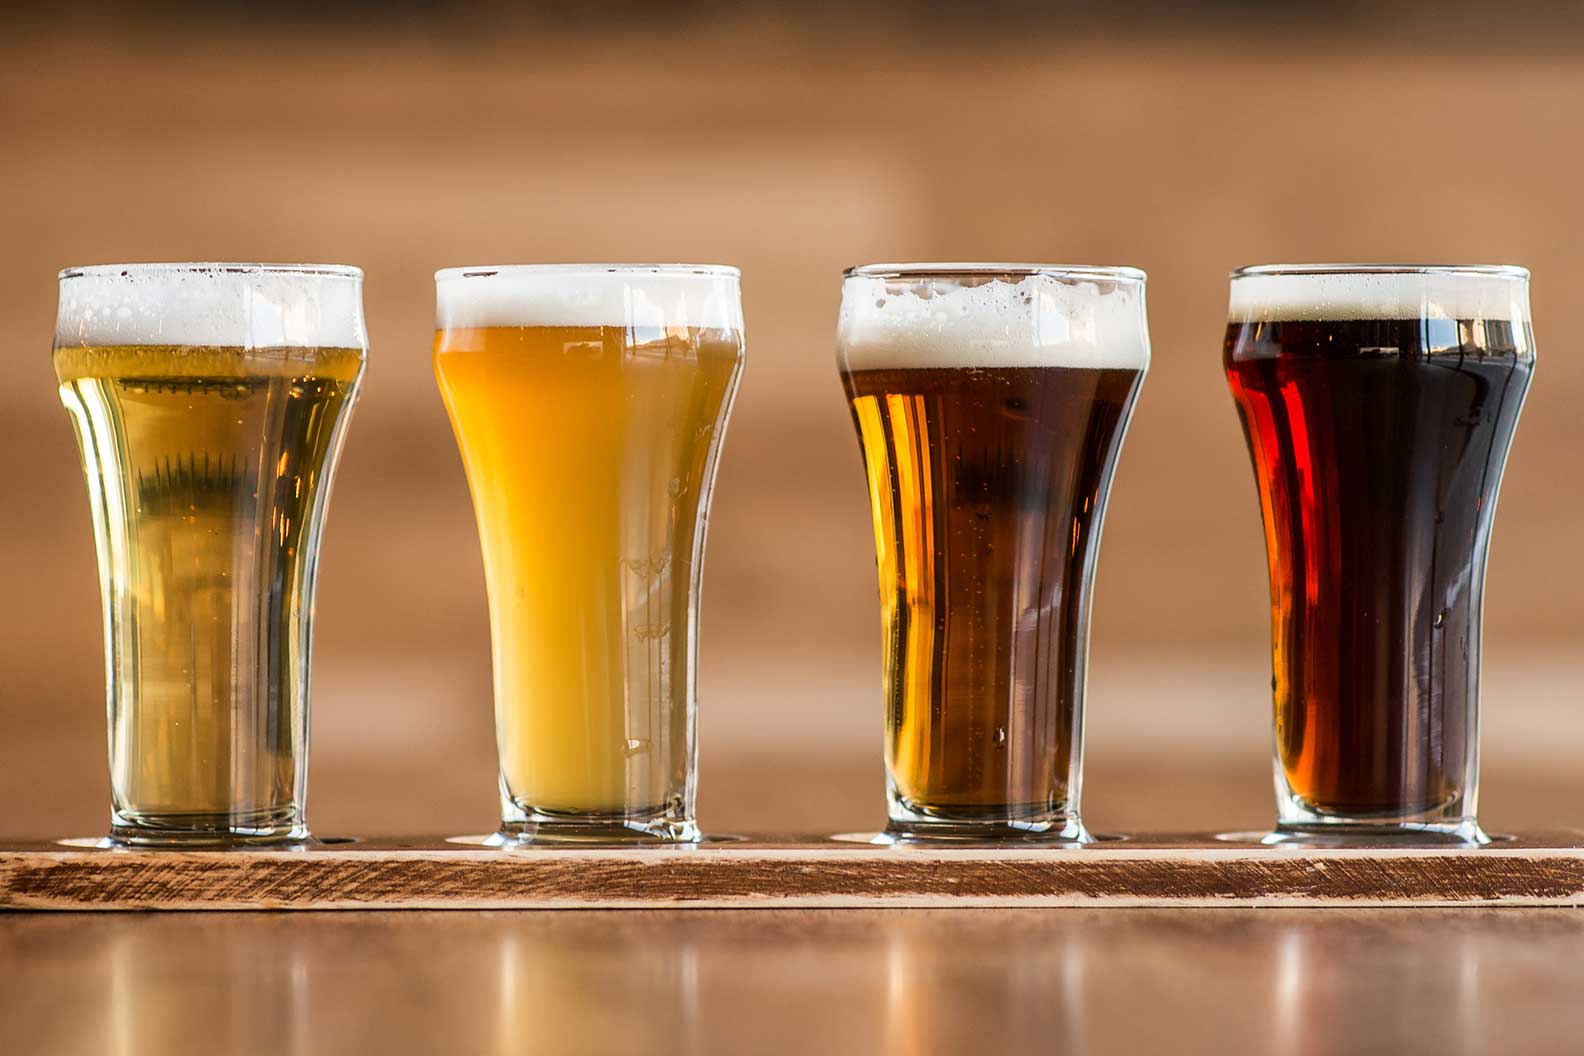 How is non-alcoholic beer made?